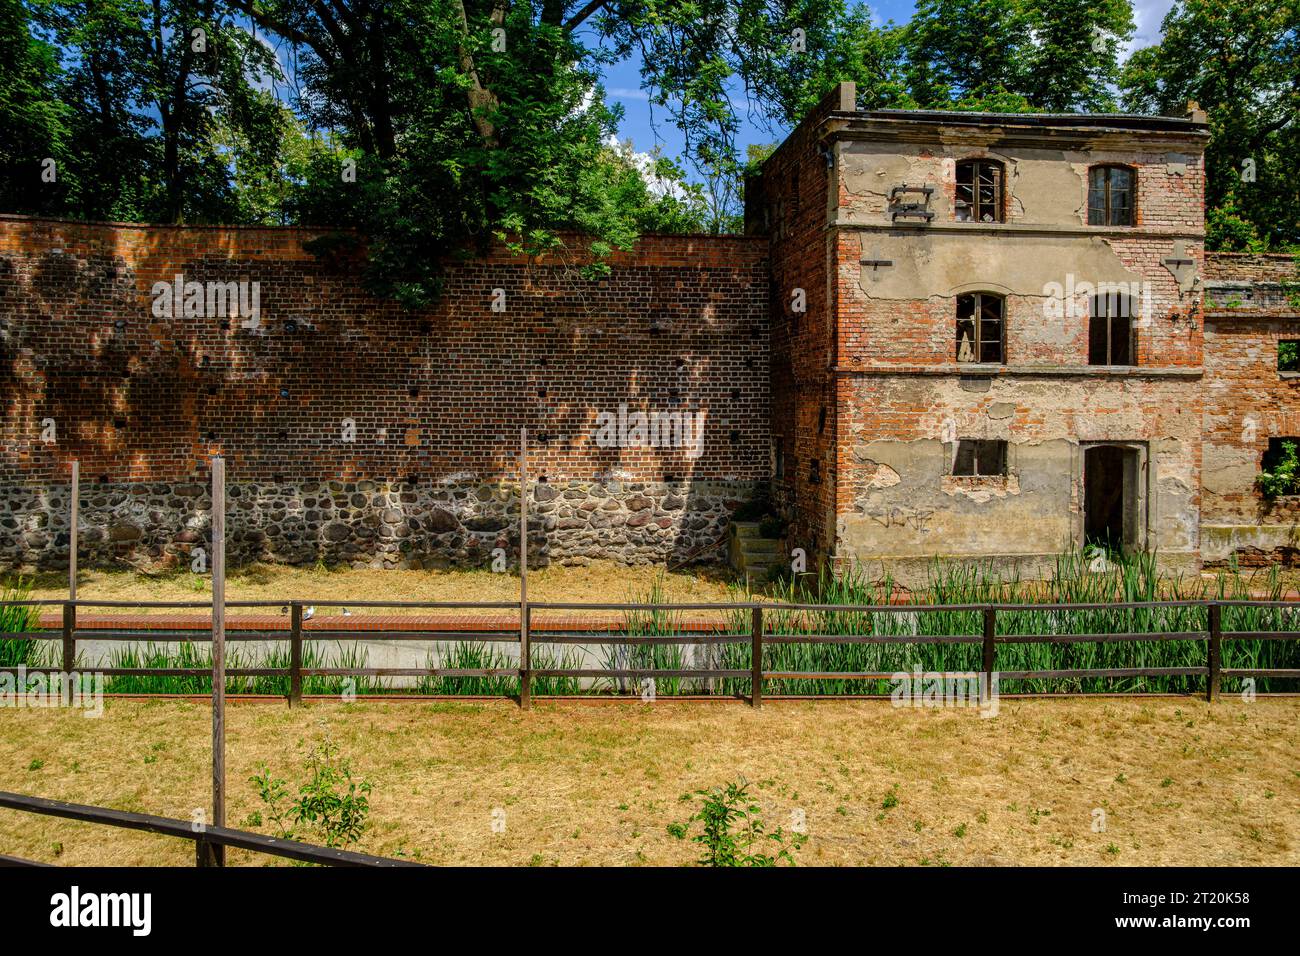 Abandoned, dilapidated building integrated into the old historic town wall of Namyslow (Namslau), Opole Voivodeship, Poland. Stock Photo